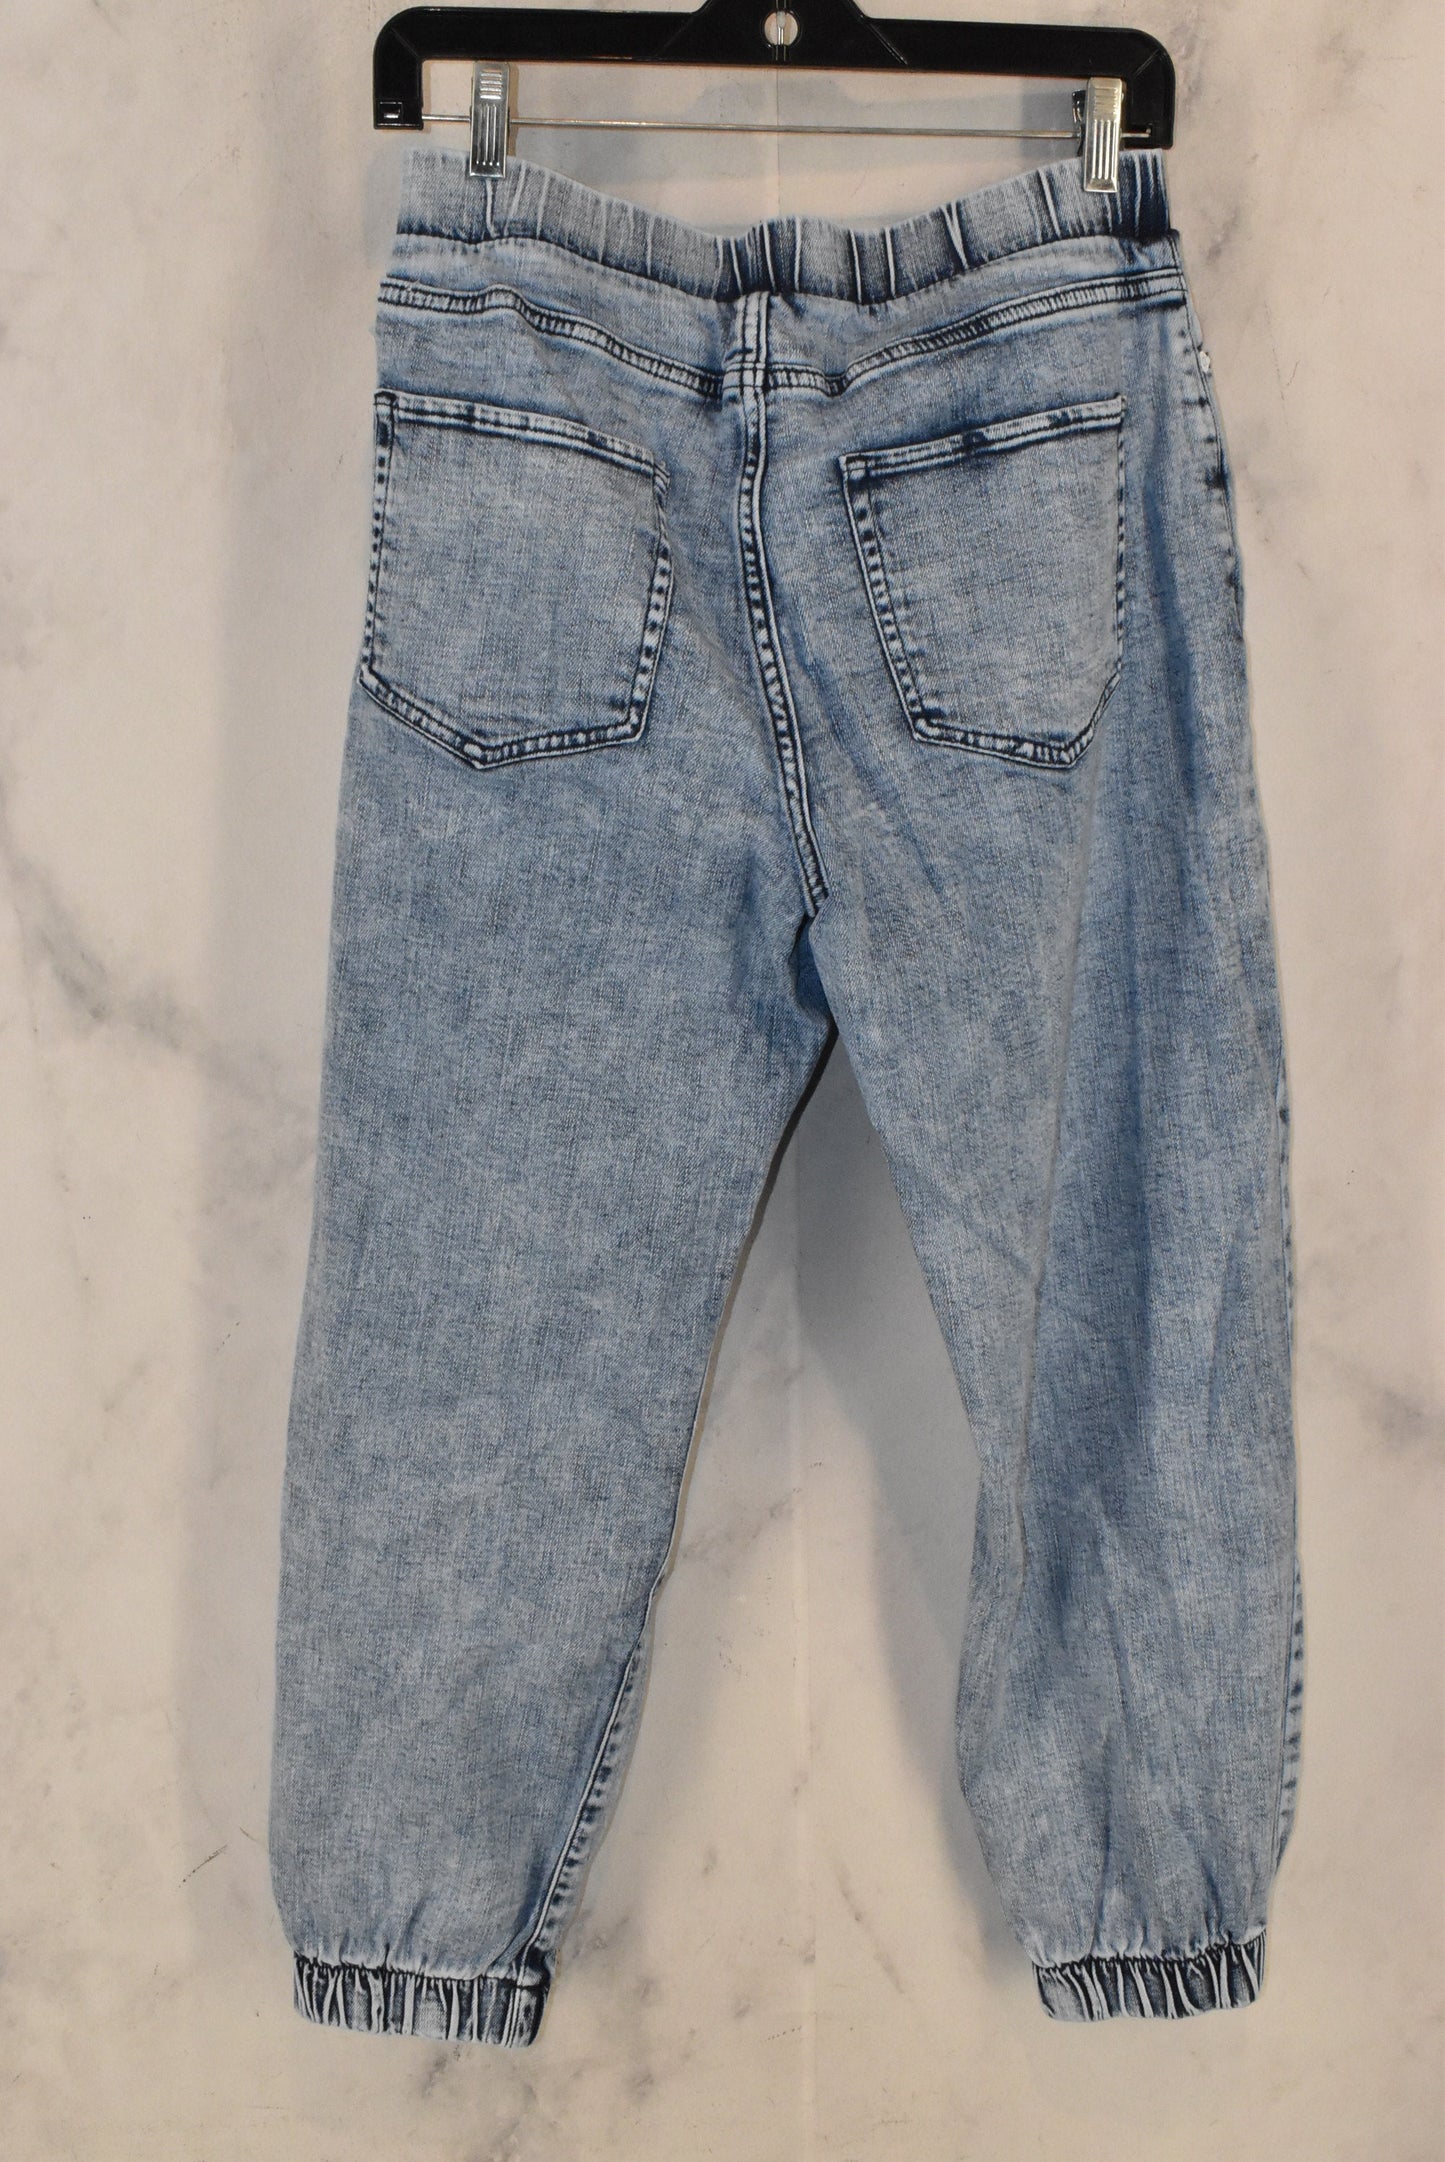 Jeans Relaxed/boyfriend By Wild Fable  Size: S